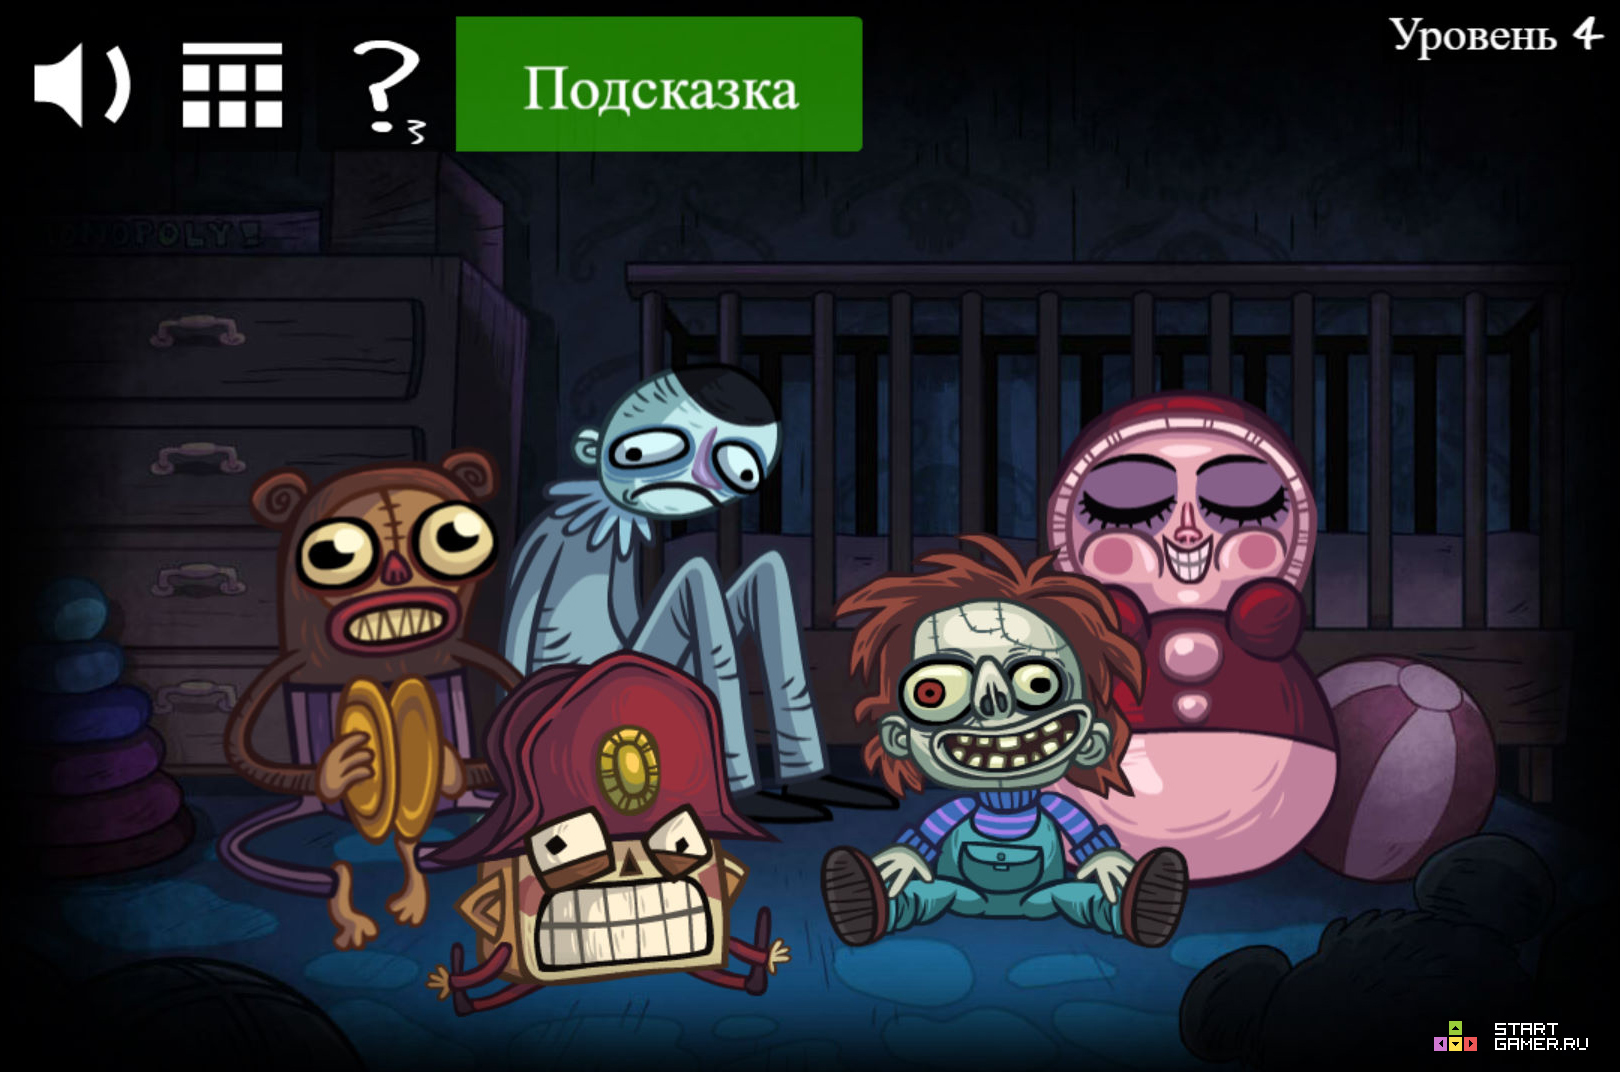 Game trollface quest. Игра troll face Quest Horror. Троллфейс квест хоррор. Троллфейс квест хоррор 1.